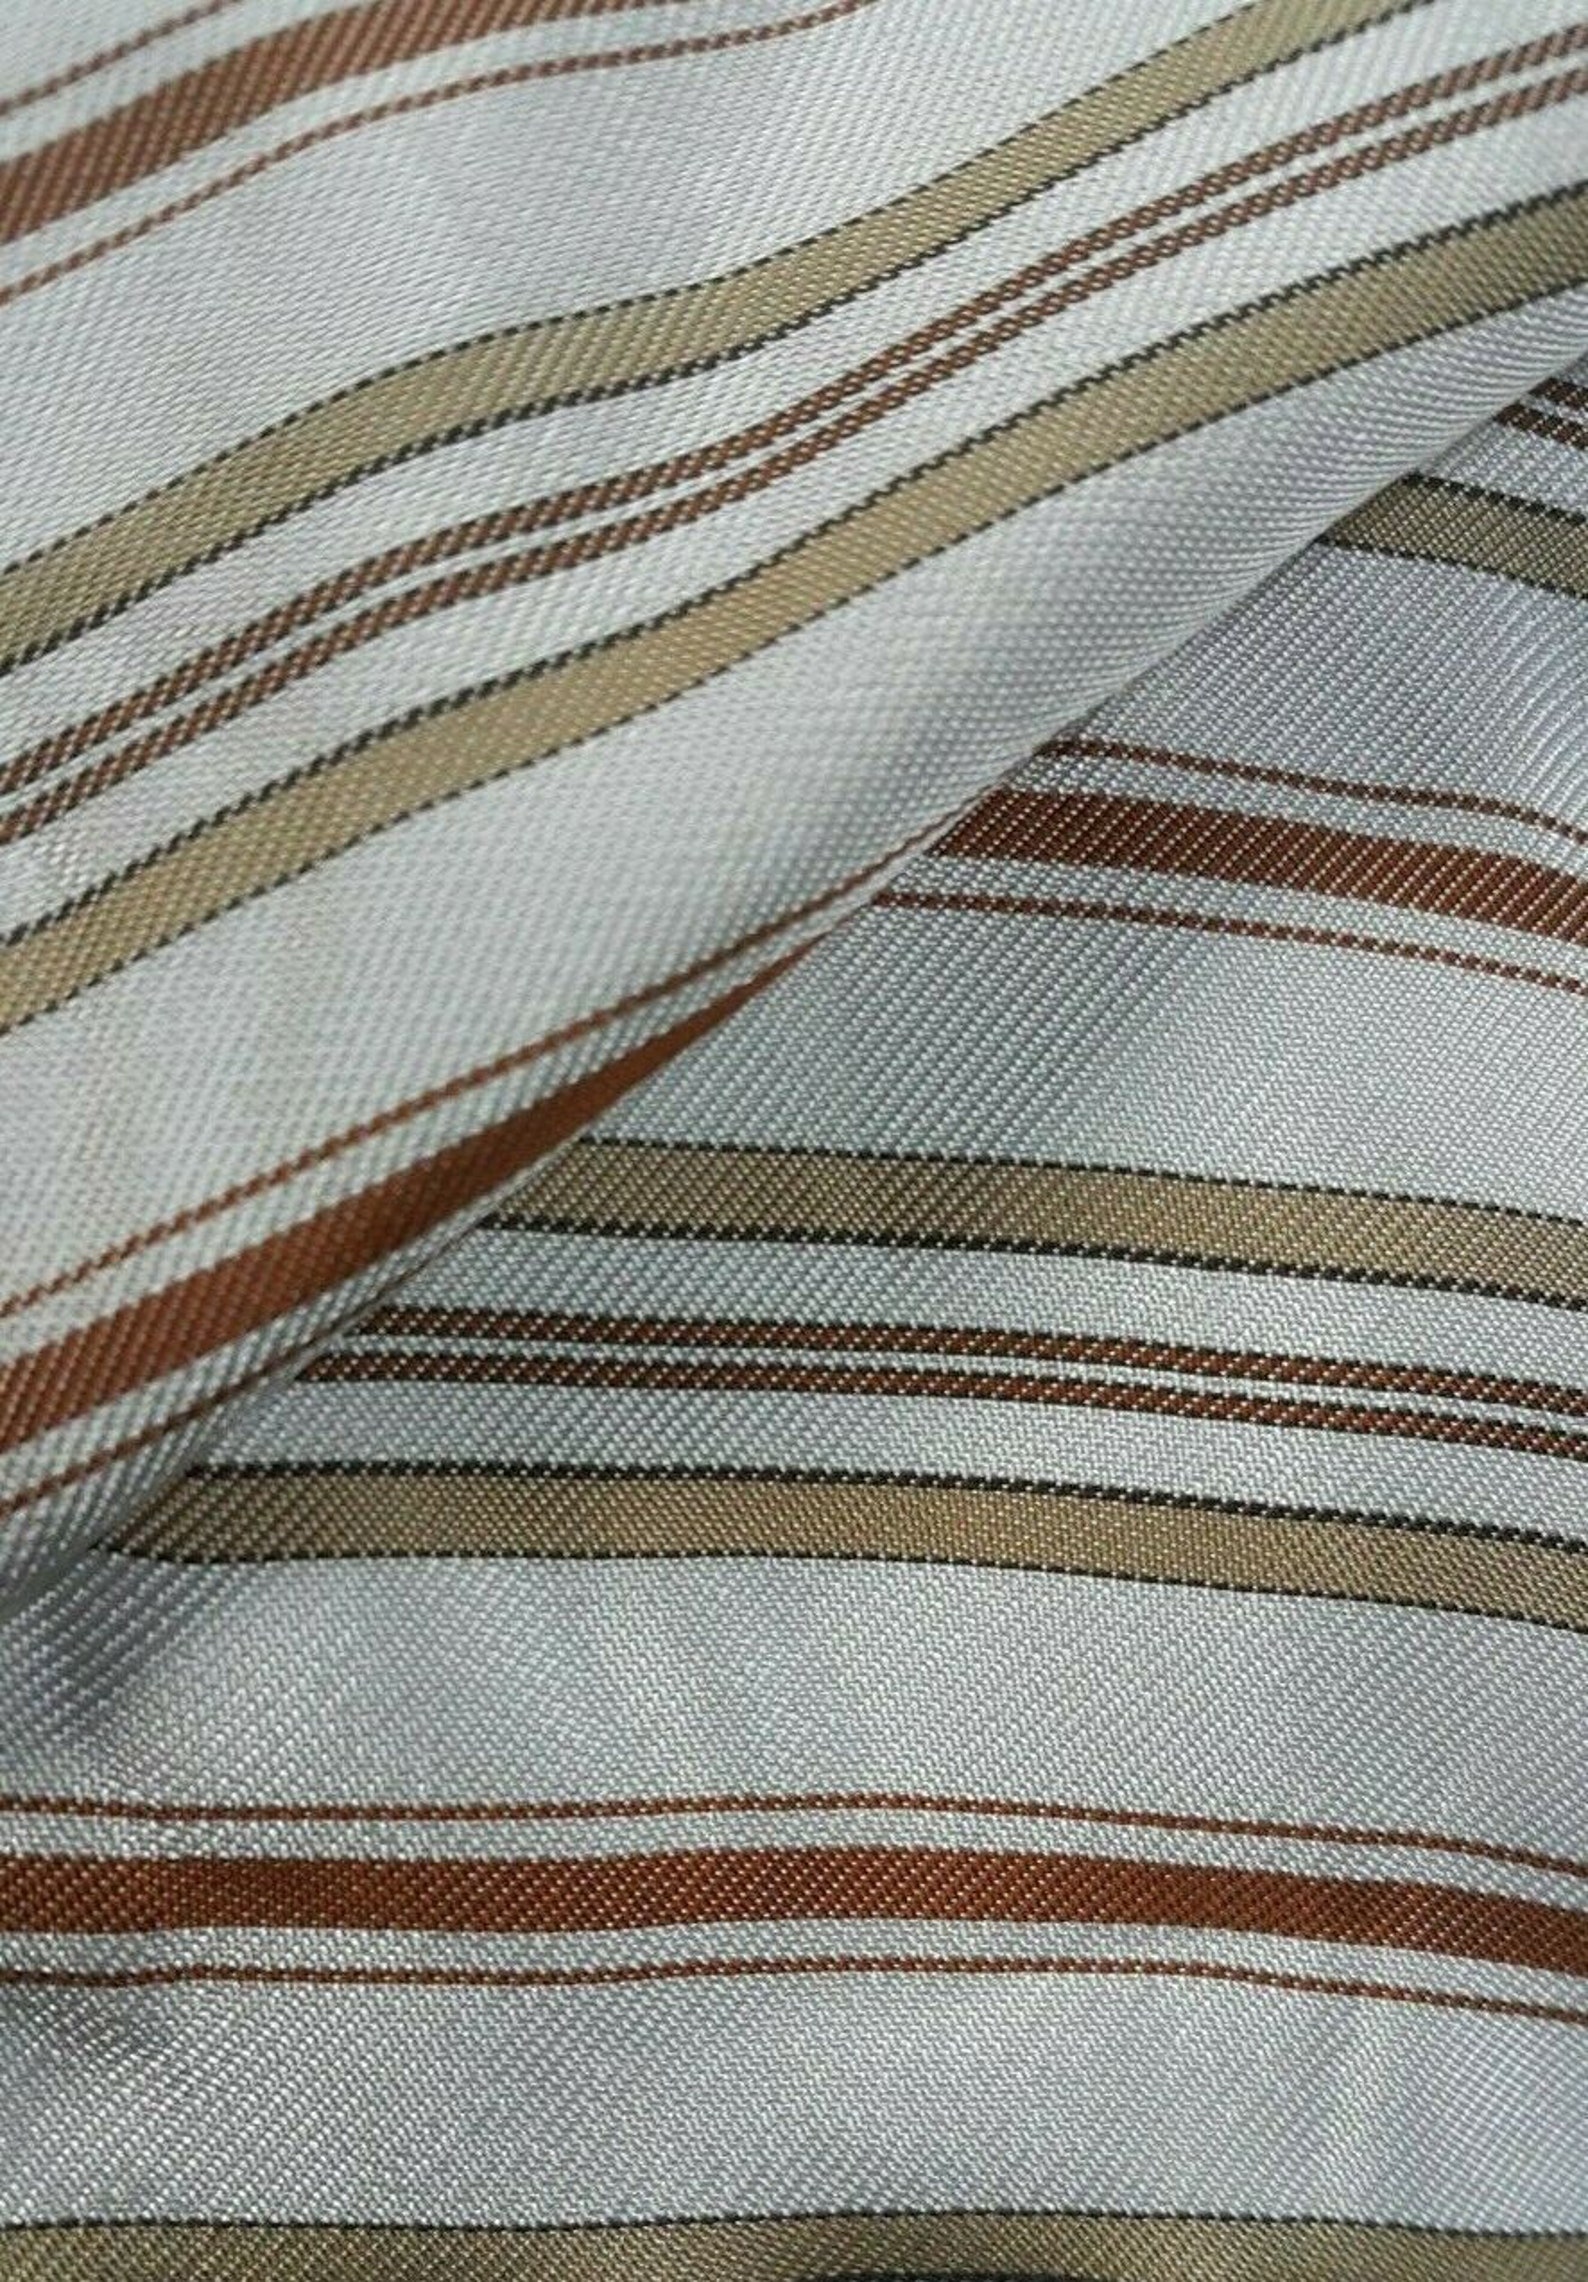 Striped 100% Viscose Dress Lining Fabric Sold By The Metre | Etsy